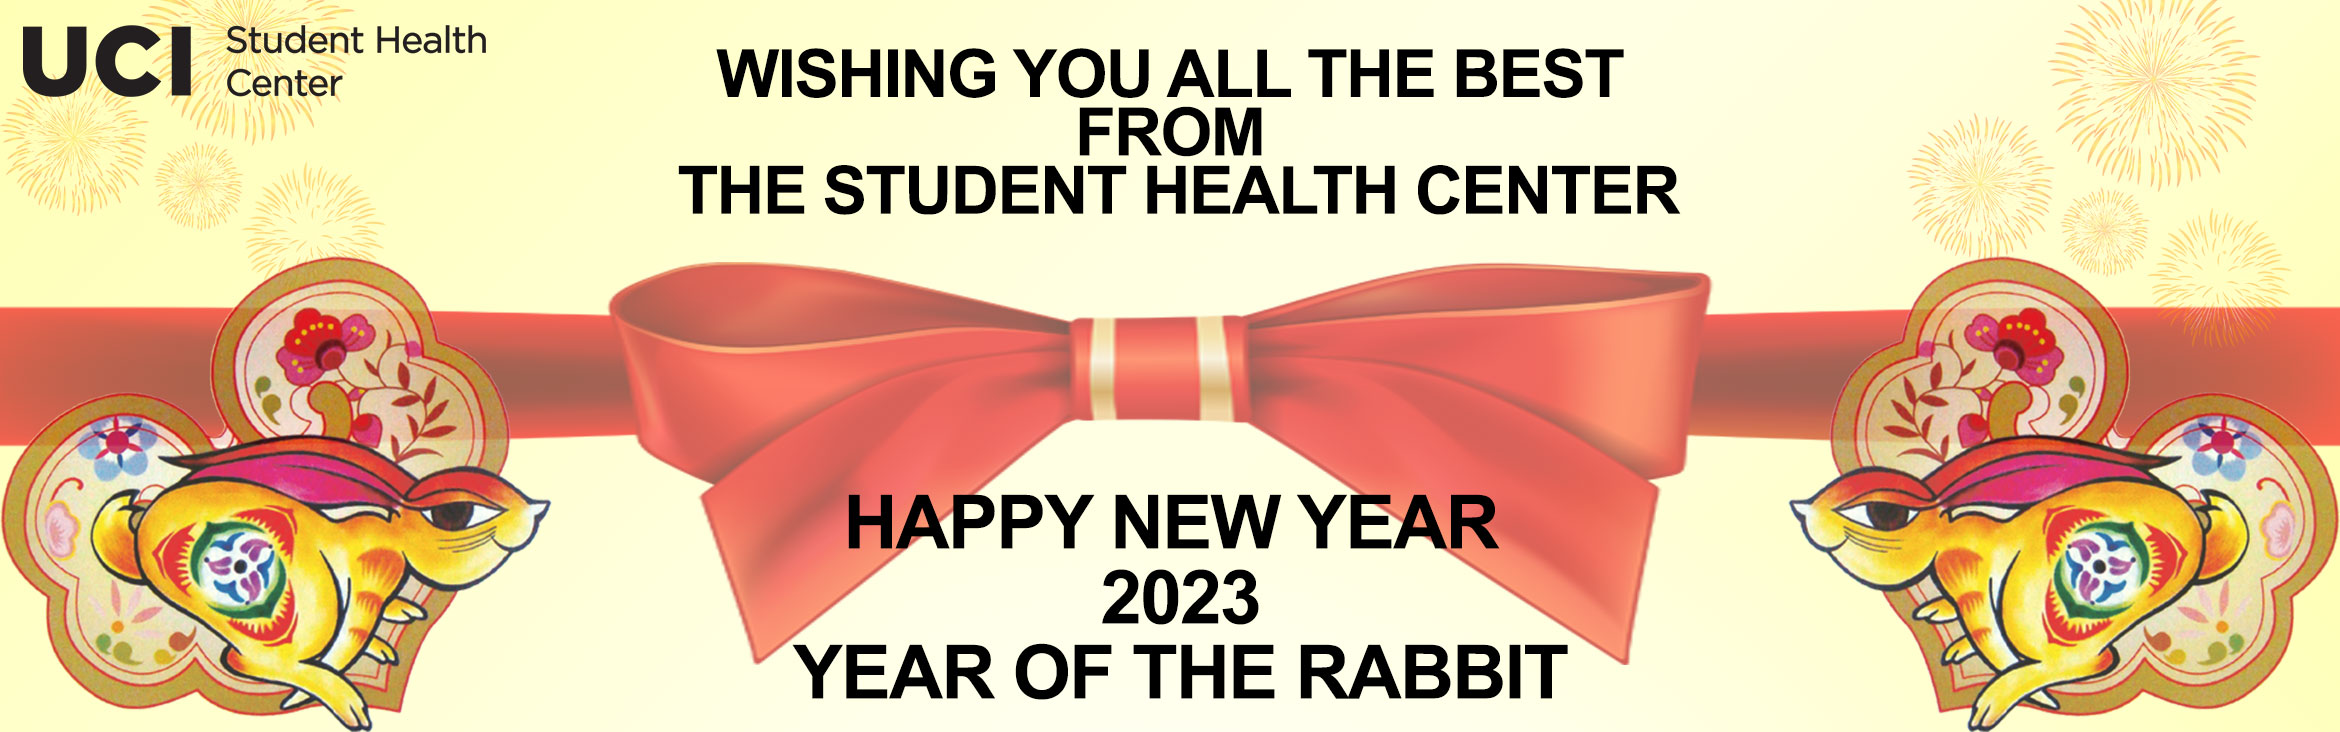 Wishing You All The Best From The Student Health Center.